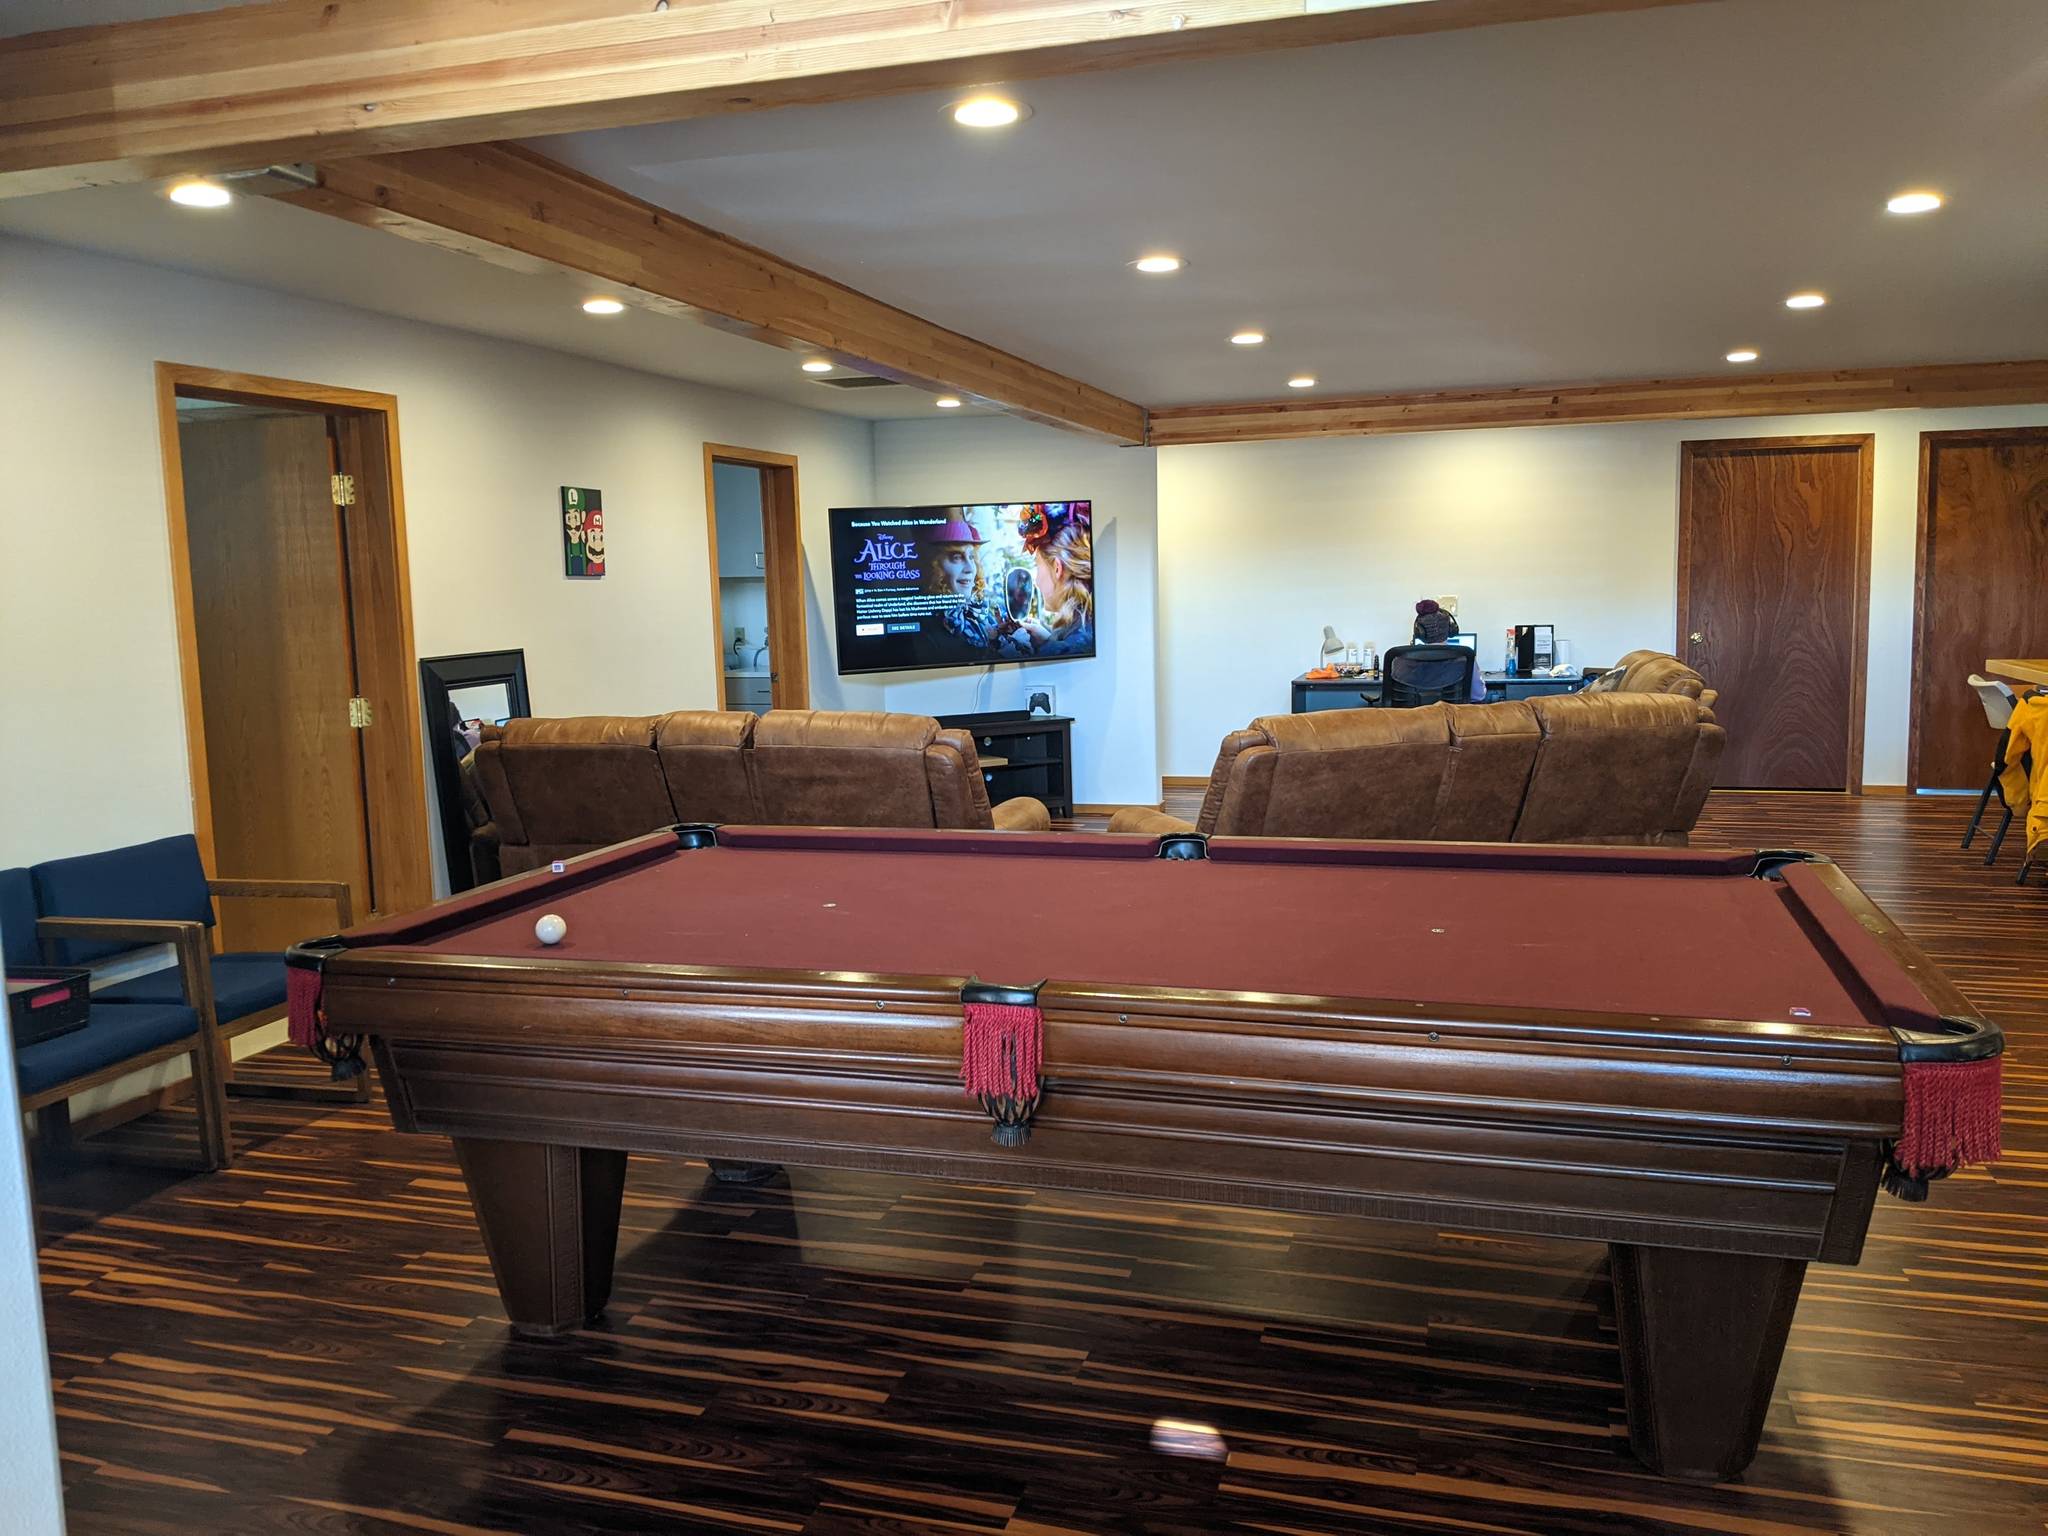 DAVE HAVILAND | THE DAILY WORLD
Couches, TV, a pool table and a computer area are seen from the common area.